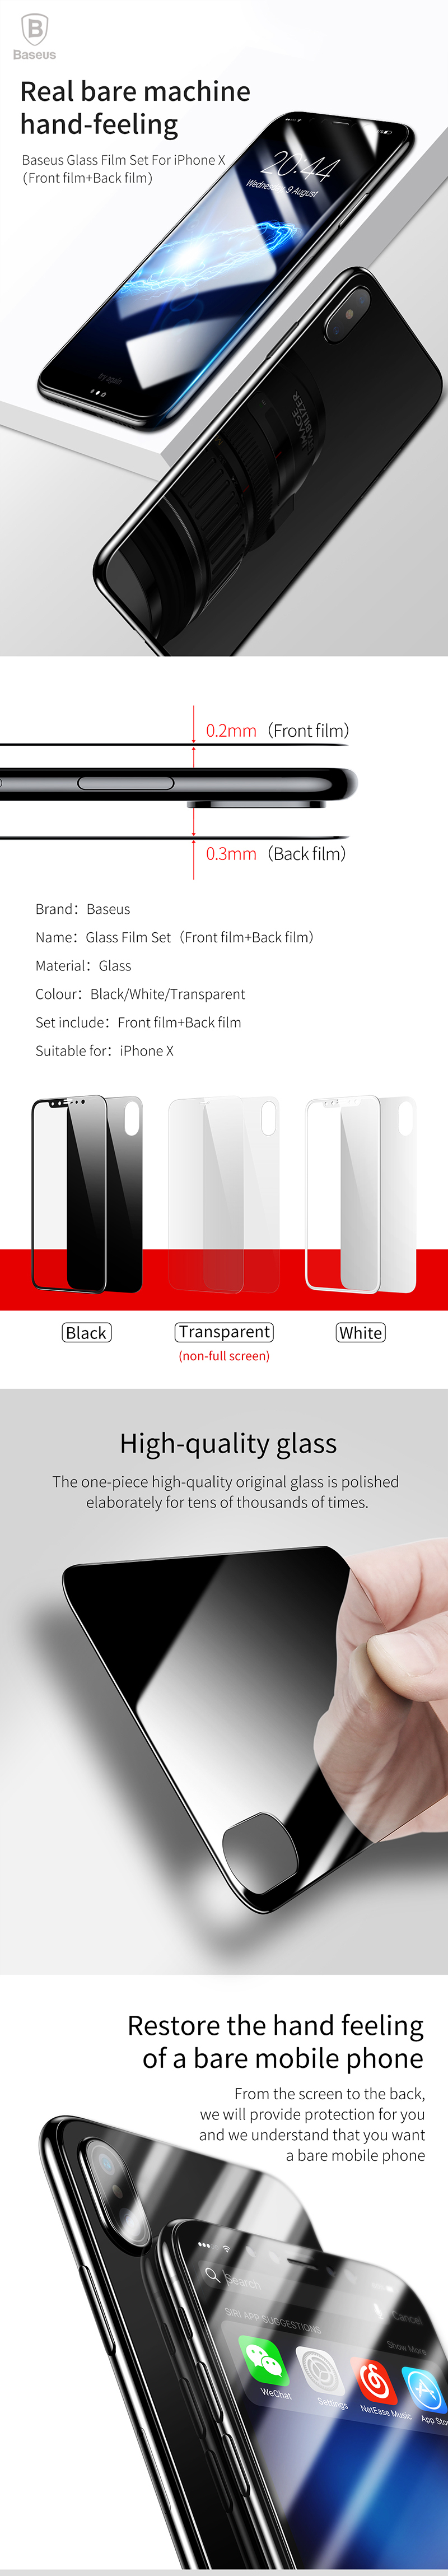 Baseus-02mm-3D-Arc-Edge-Front-Rear-Tempered-Glass-Film-Screen-Protector-for-iPhone-XSX-1209827-1